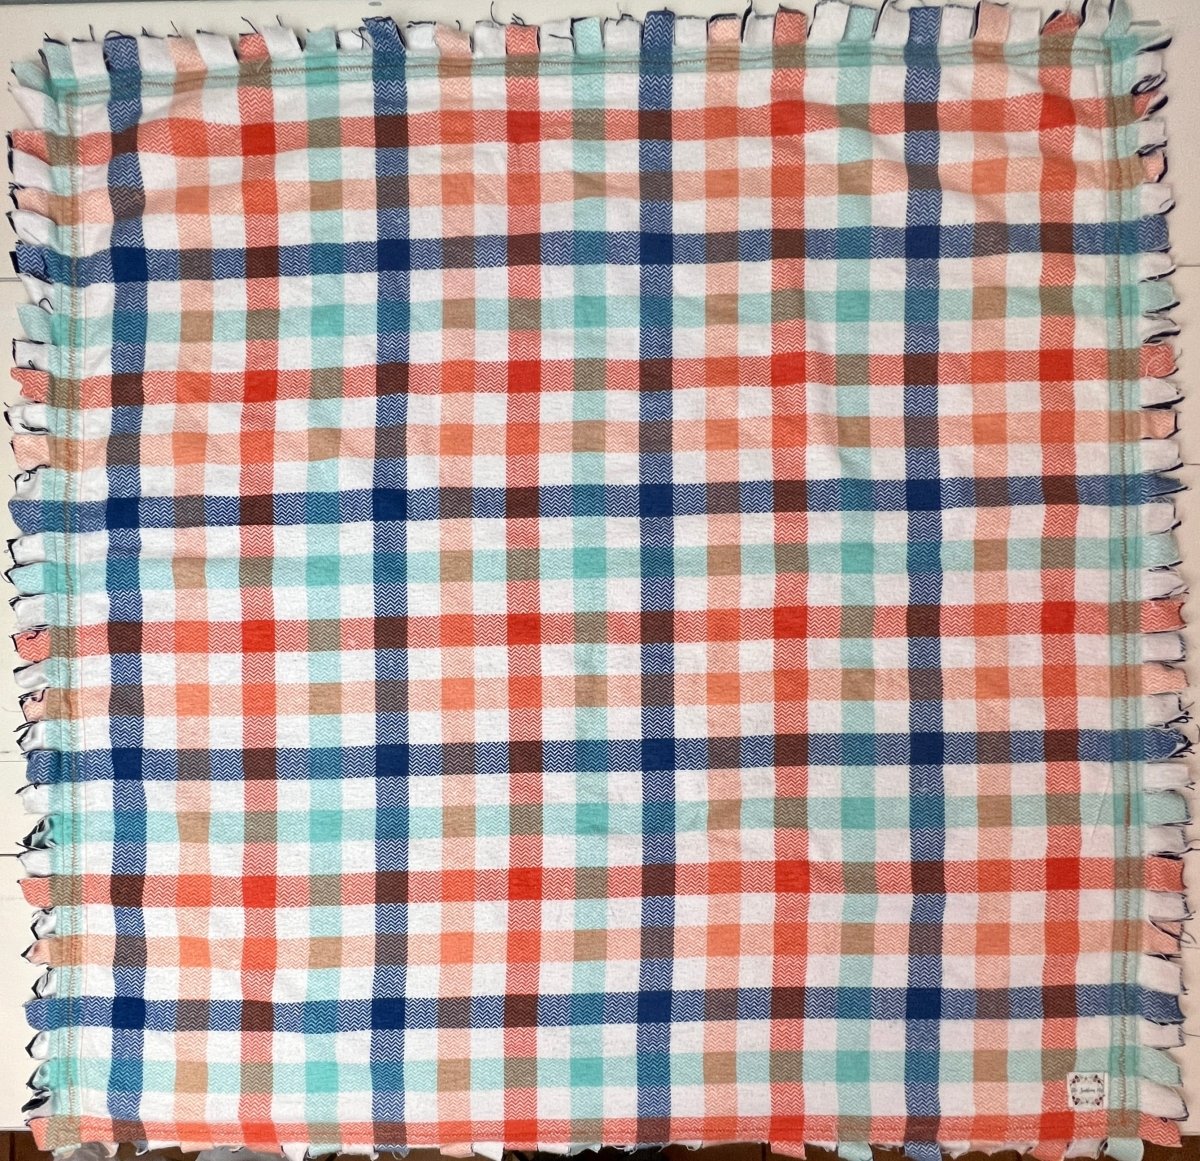 Baby Quilt- Plaid Rag Quilt - The Southern Nest